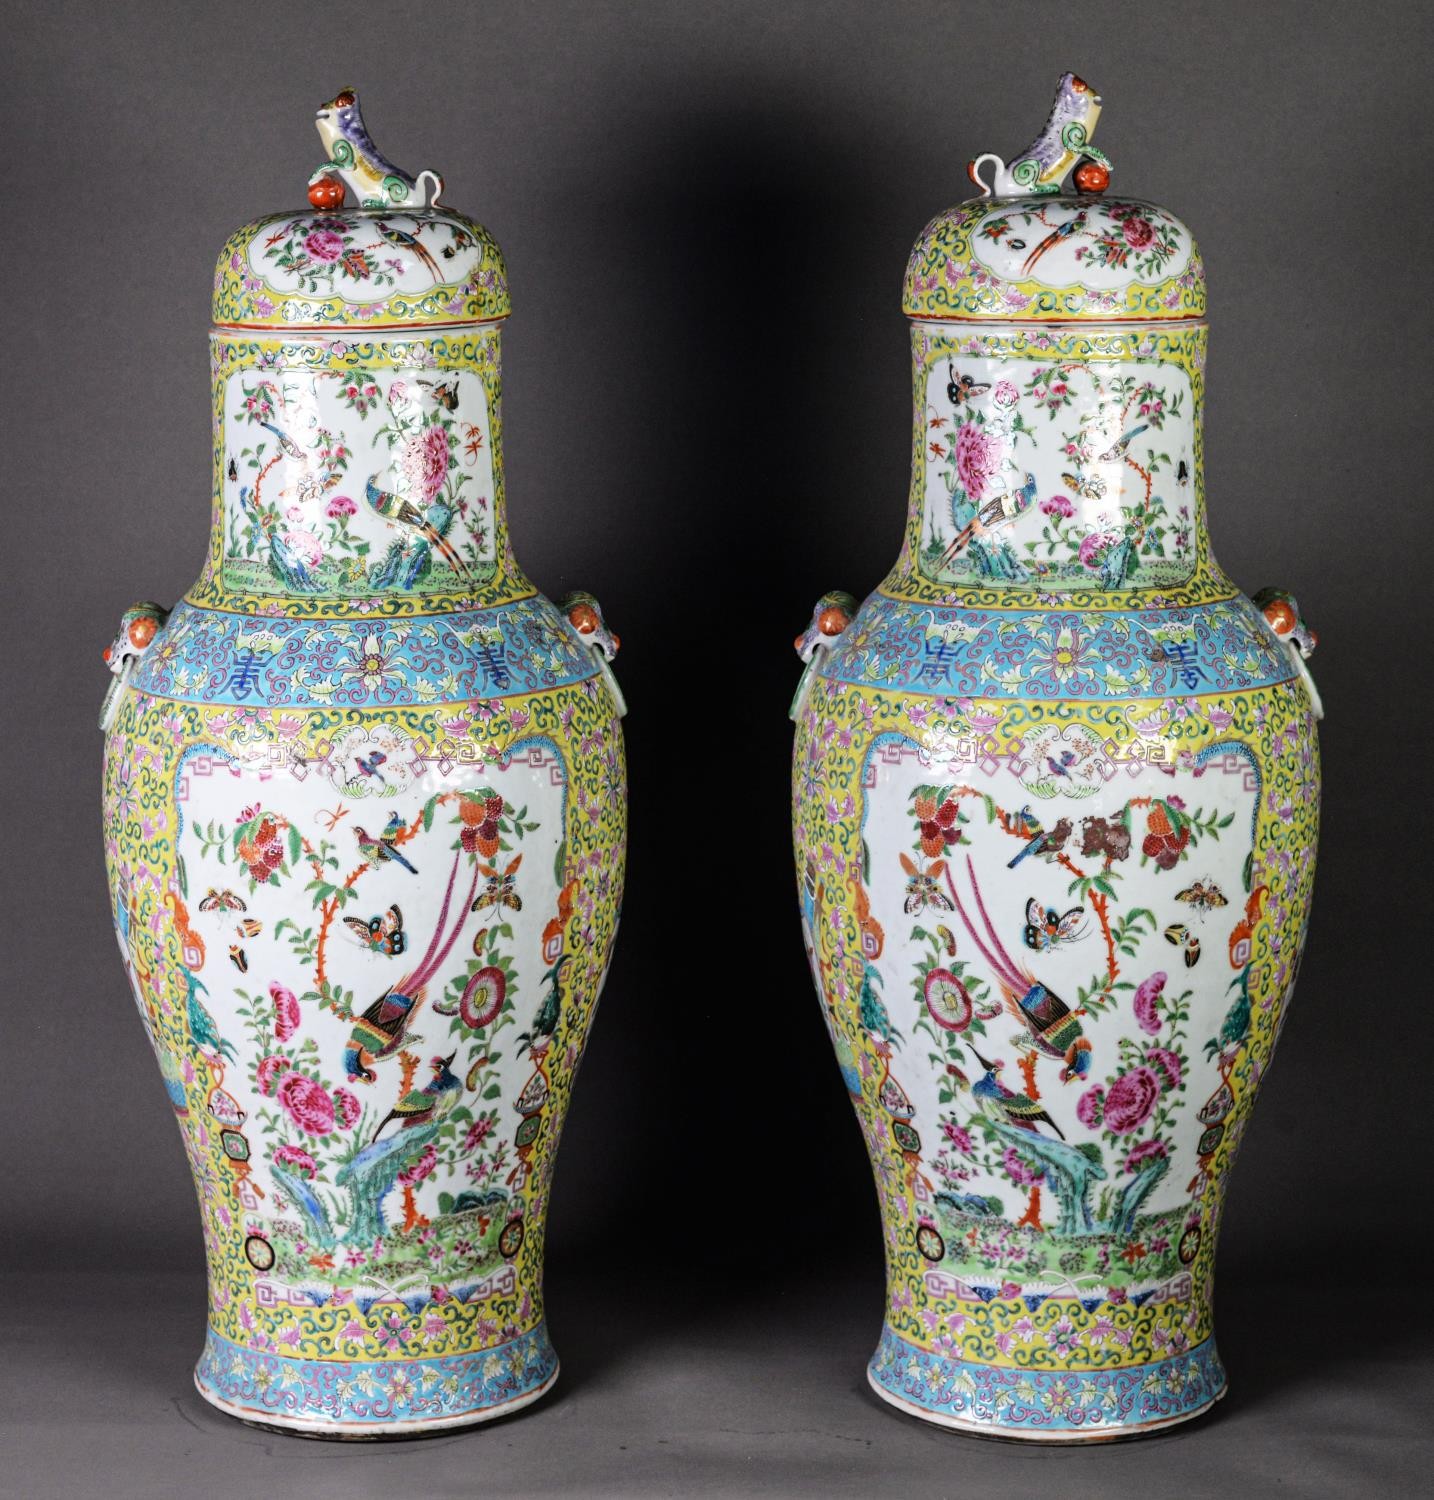 PAIR OF TWENTIETH CENTURY CHINESE FAMILLE JAUNE PORCELAIN LARGE VASES AND COVERS, each of baluster